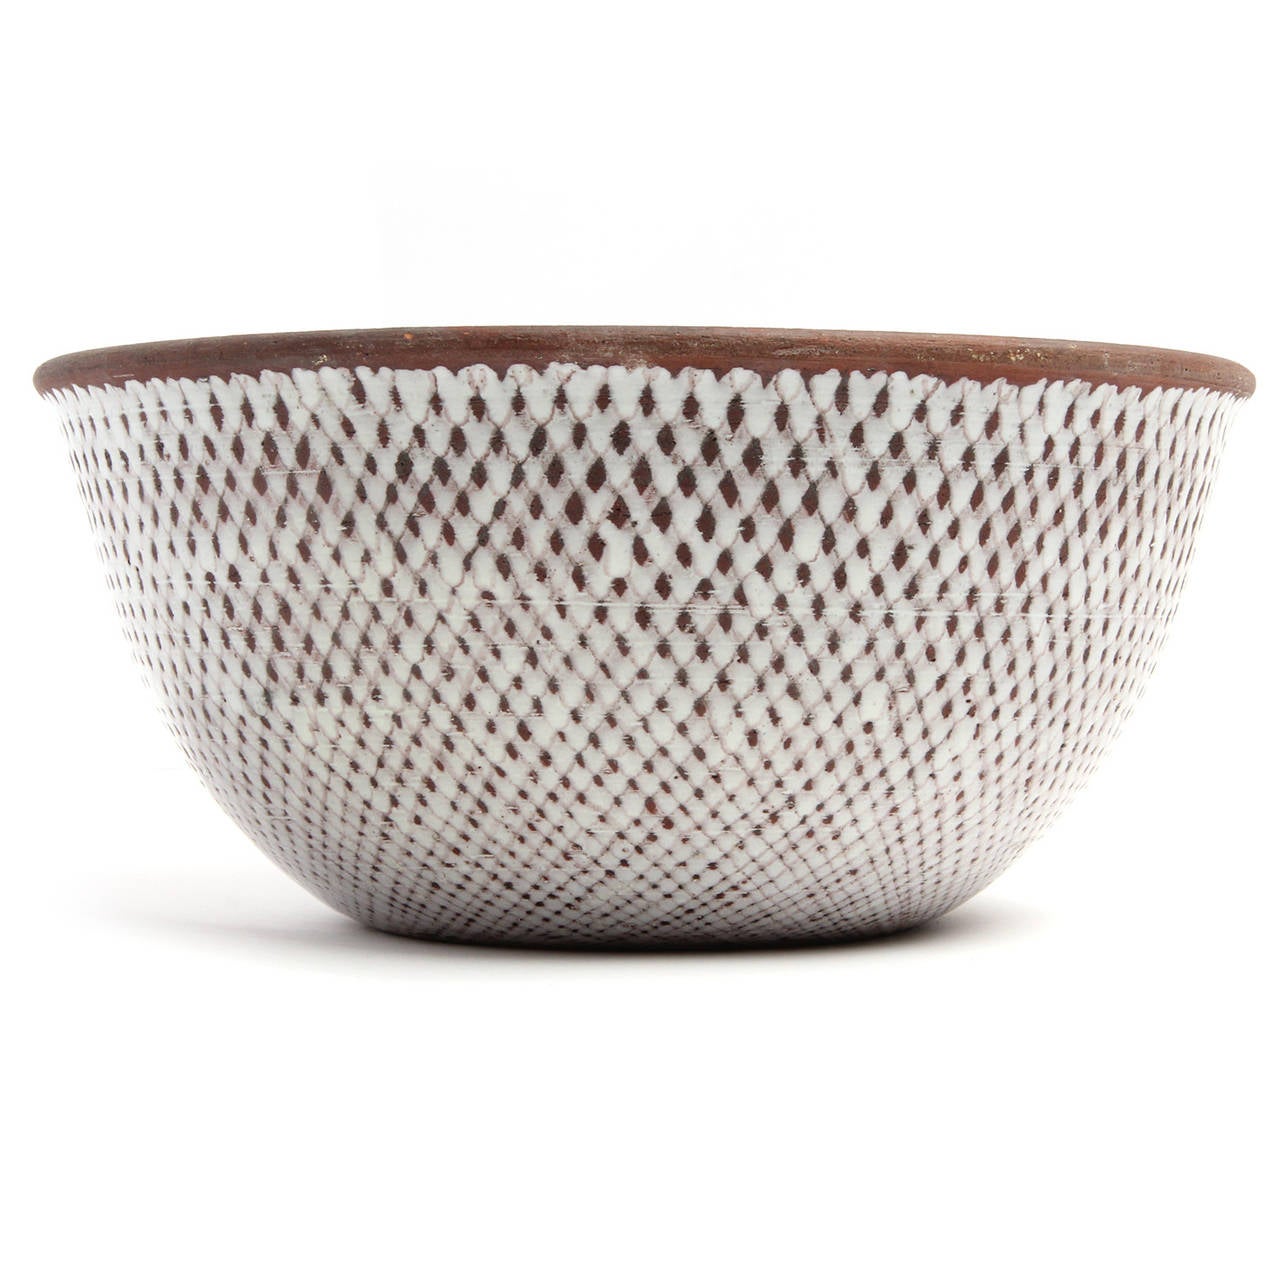 A well scaled and masterfully executed hand thrown ceramic bowl having a matte black interior glaze and an expressive cream-toned diamond grid-patterned outer glaze that contrasts with the naked mocha clay of the bowl peering through underneath.